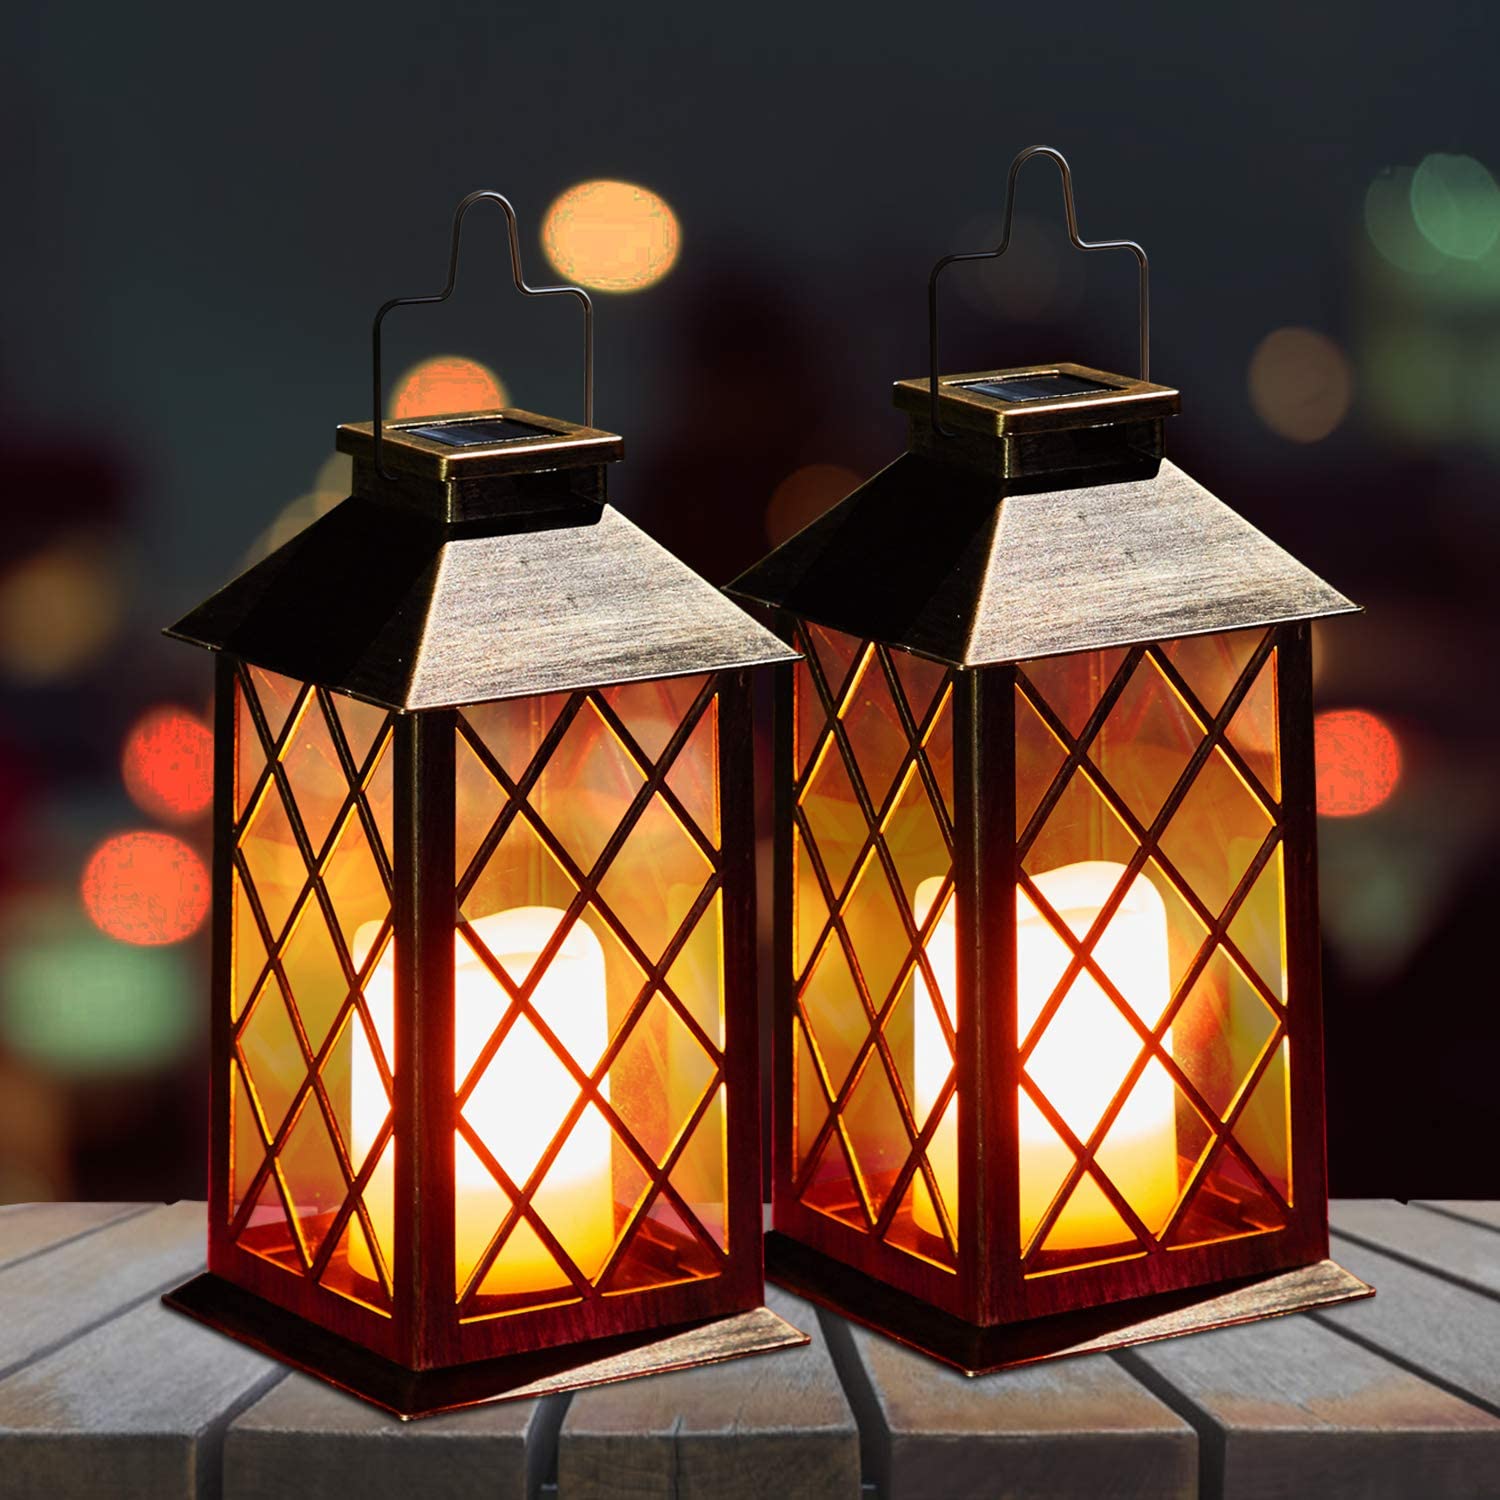 1/2 Pack Solar Lanterns, OxyLED Solar Lights Outdoor, LED Hanging Lanterns  Solar Powered with Handle, Waterproof Flickering Flameless Candle Mission Lights  for Table Garden Patio Pathway Christmas